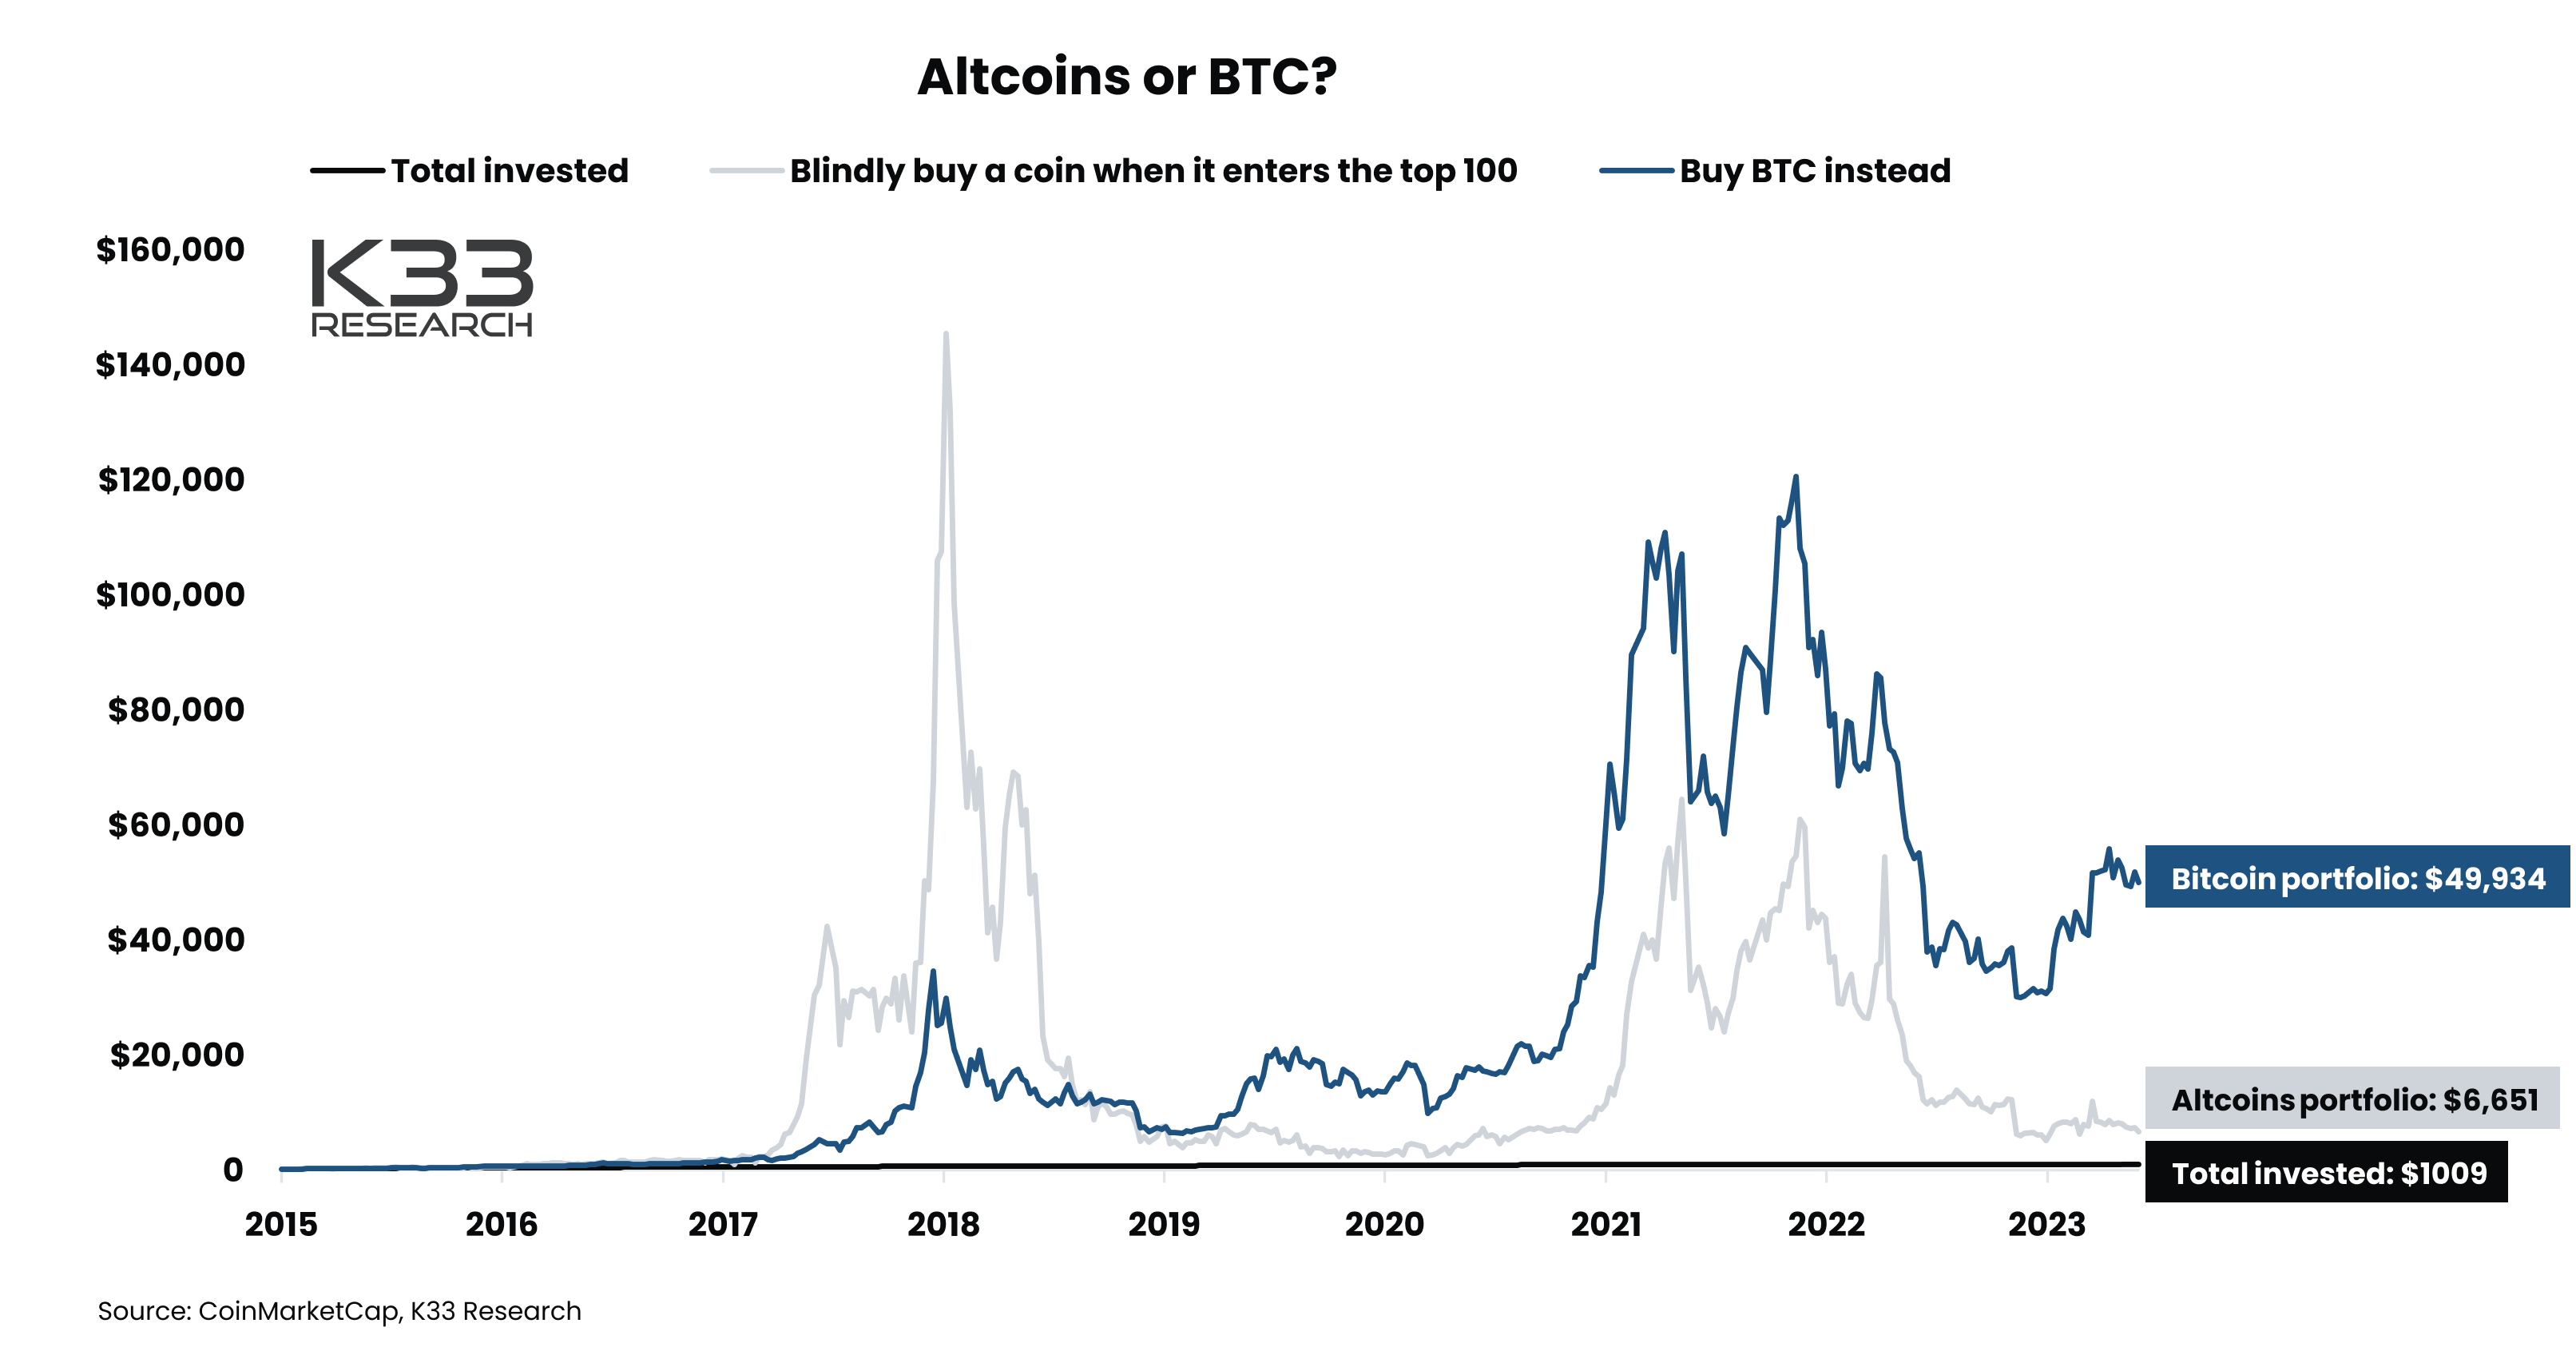 Altcoins vs BTC historical chart from K33 research